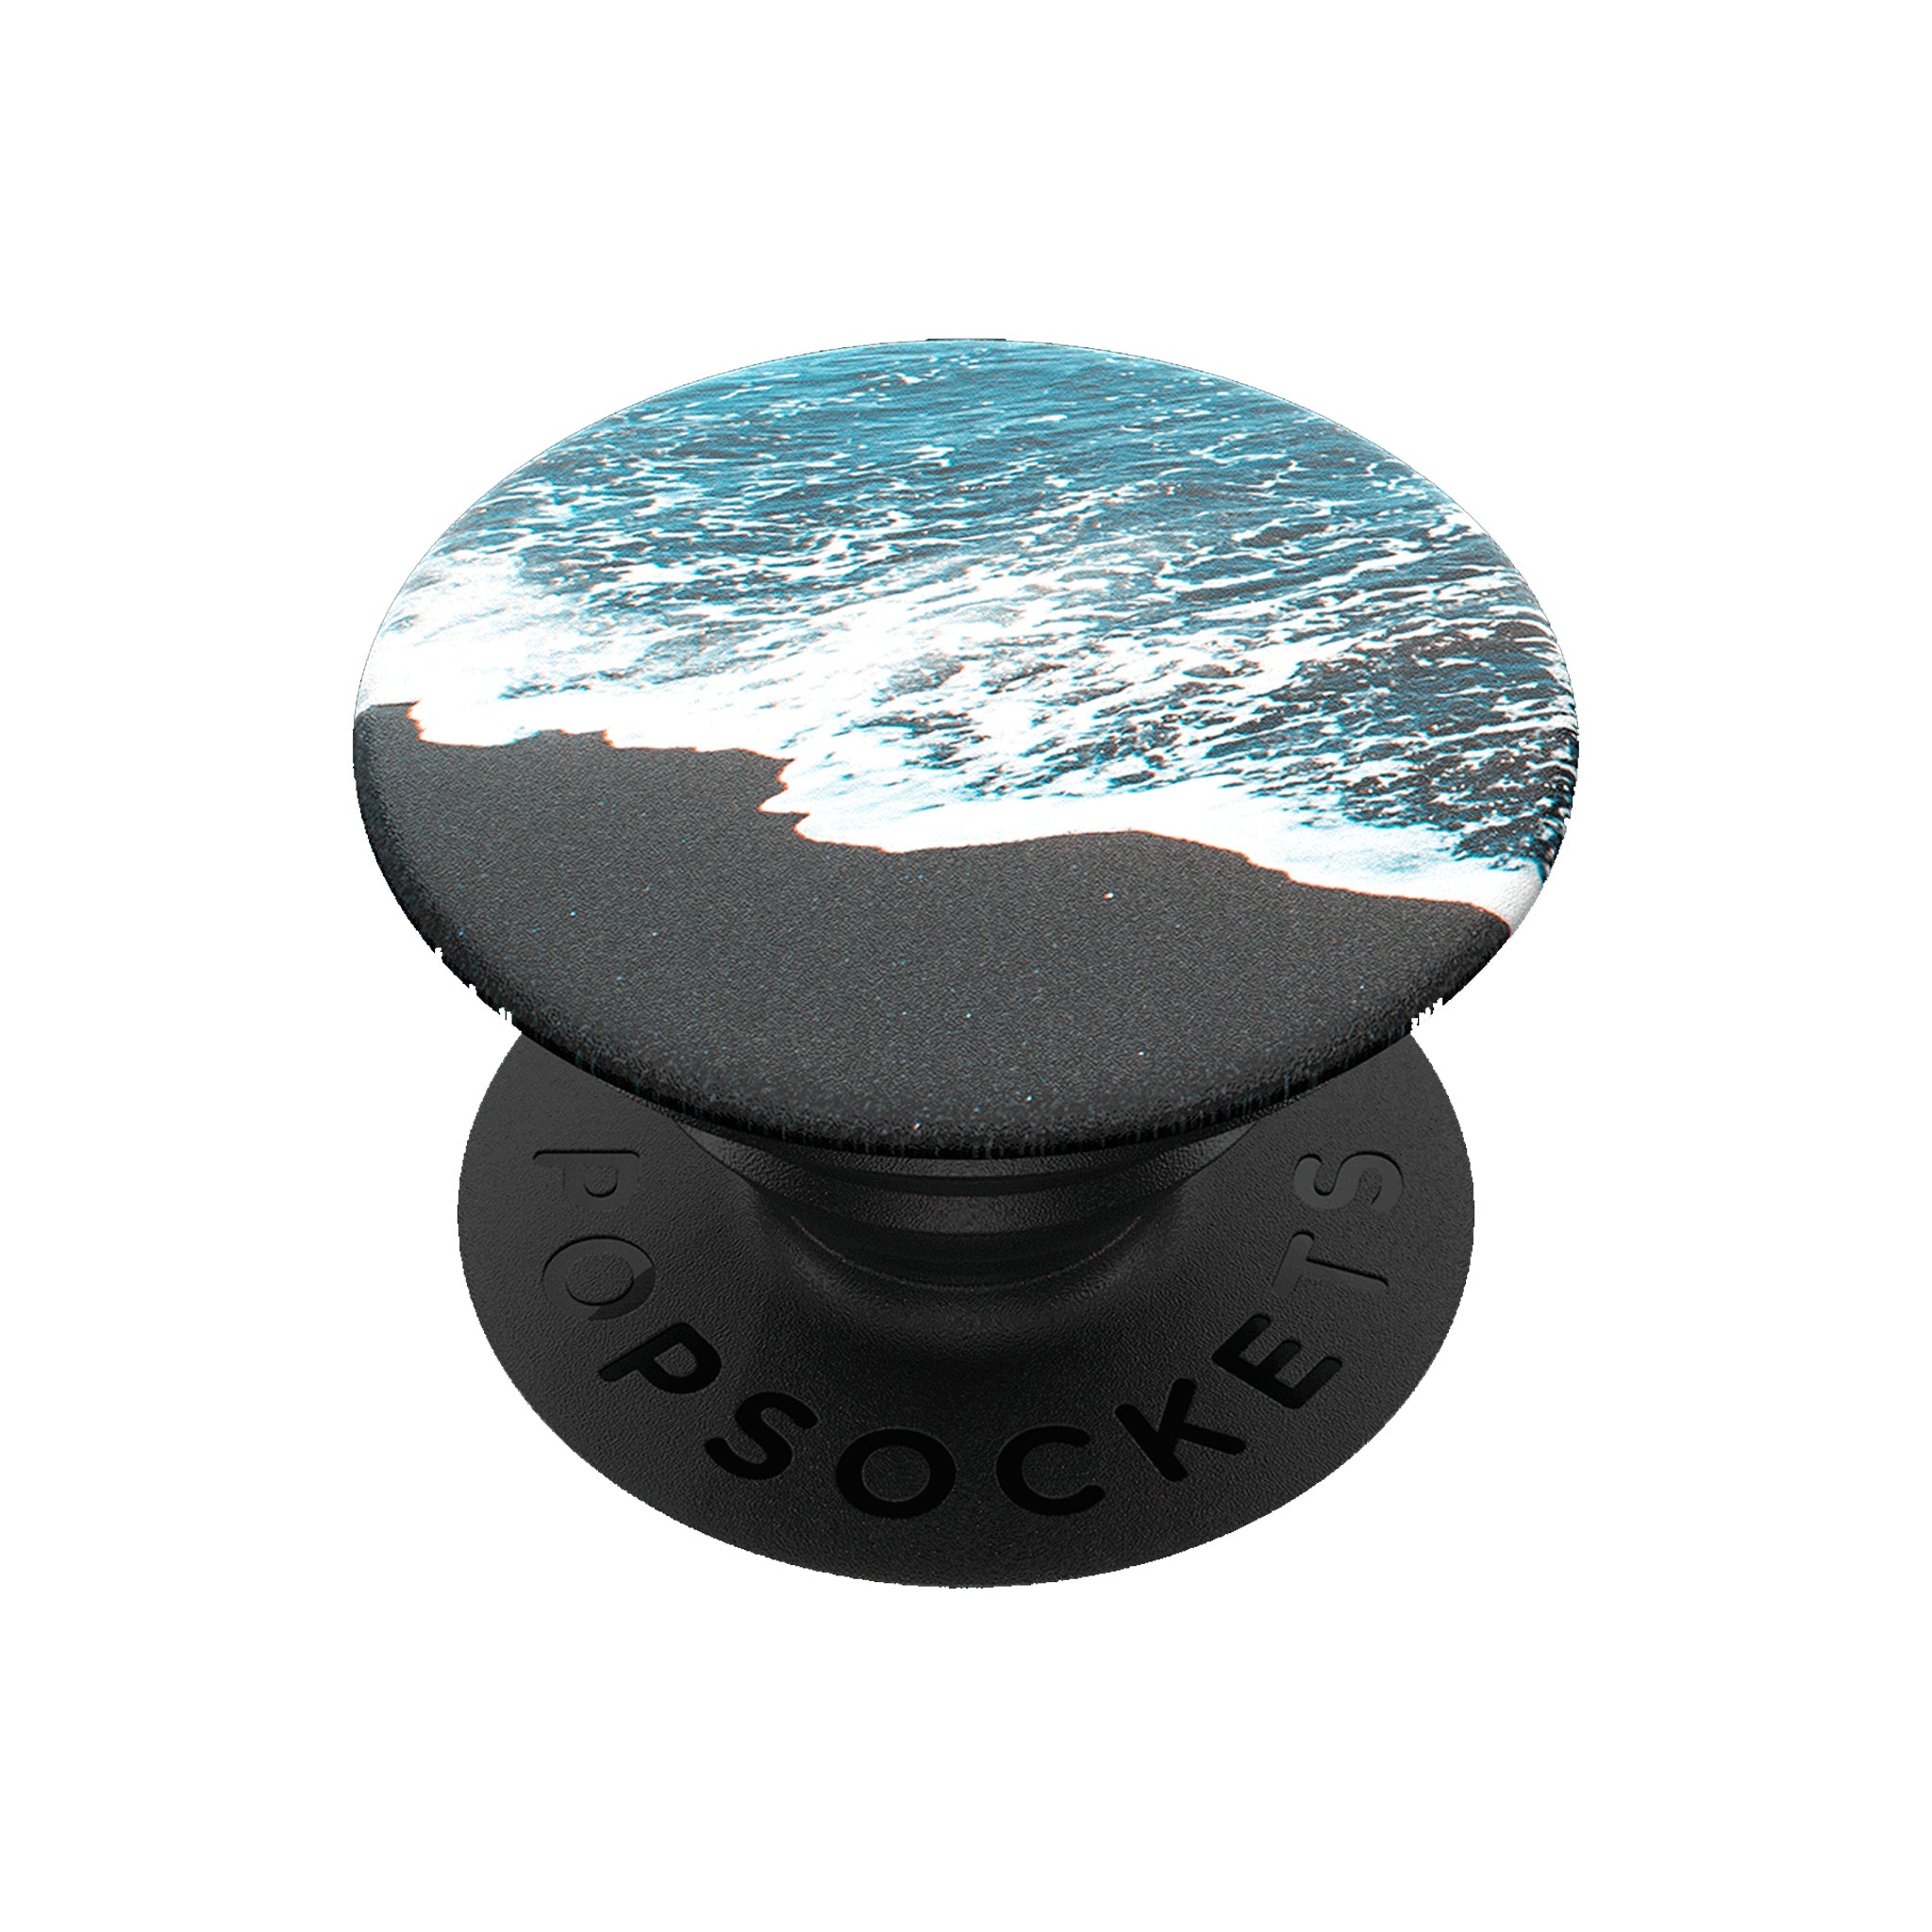 Popsockets - Popgrip Swappable Nature Device Stand And Grip - Black Sand Beach